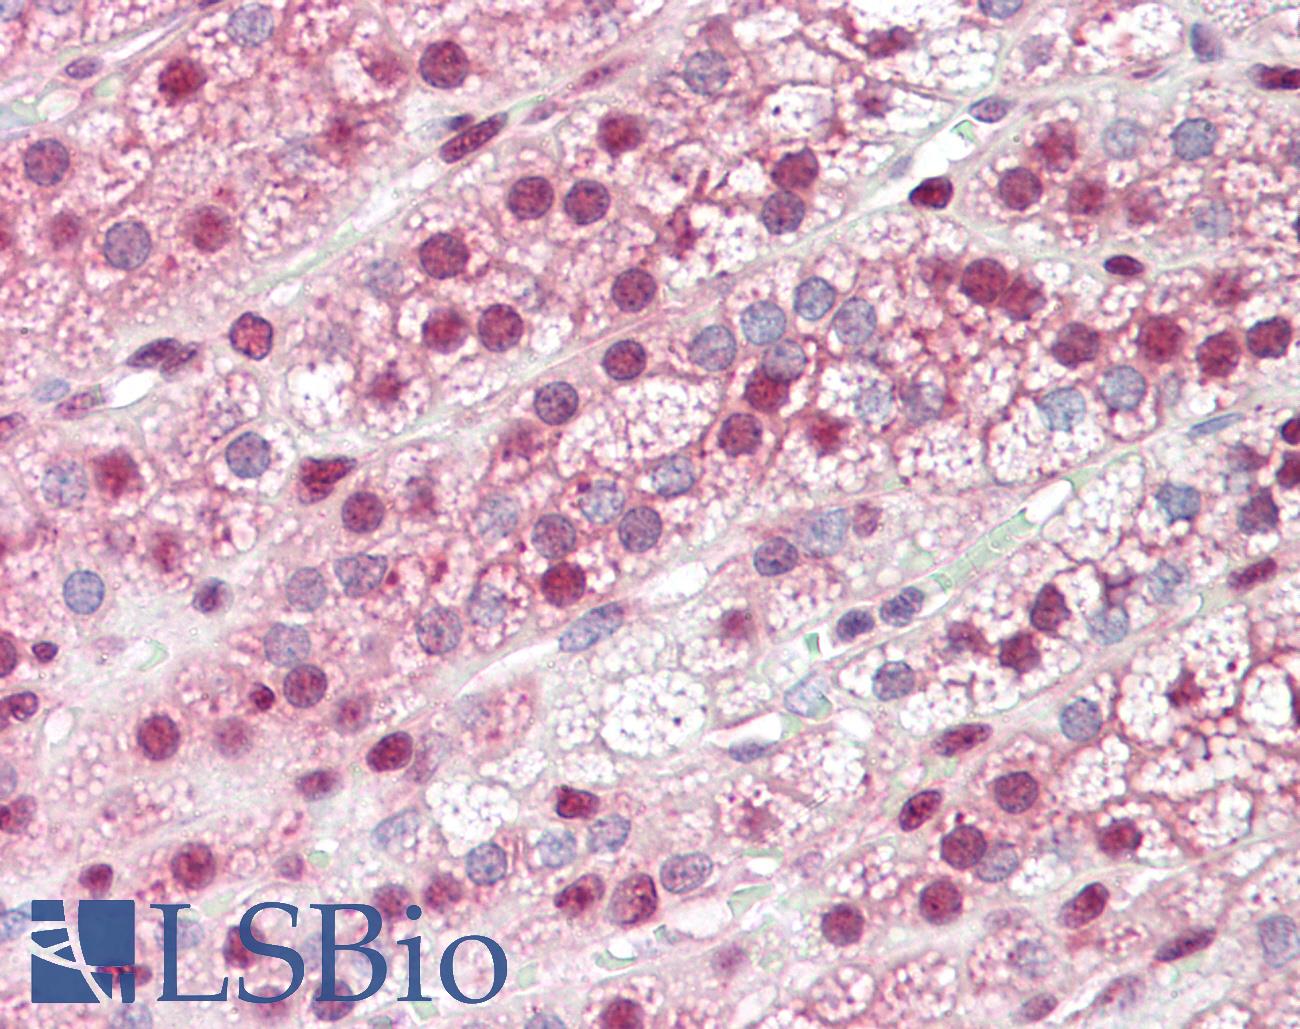 GBP6 Antibody - Anti-GBP6 antibody IHC staining of human adrenal. Immunohistochemistry of formalin-fixed, paraffin-embedded tissue after heat-induced antigen retrieval.